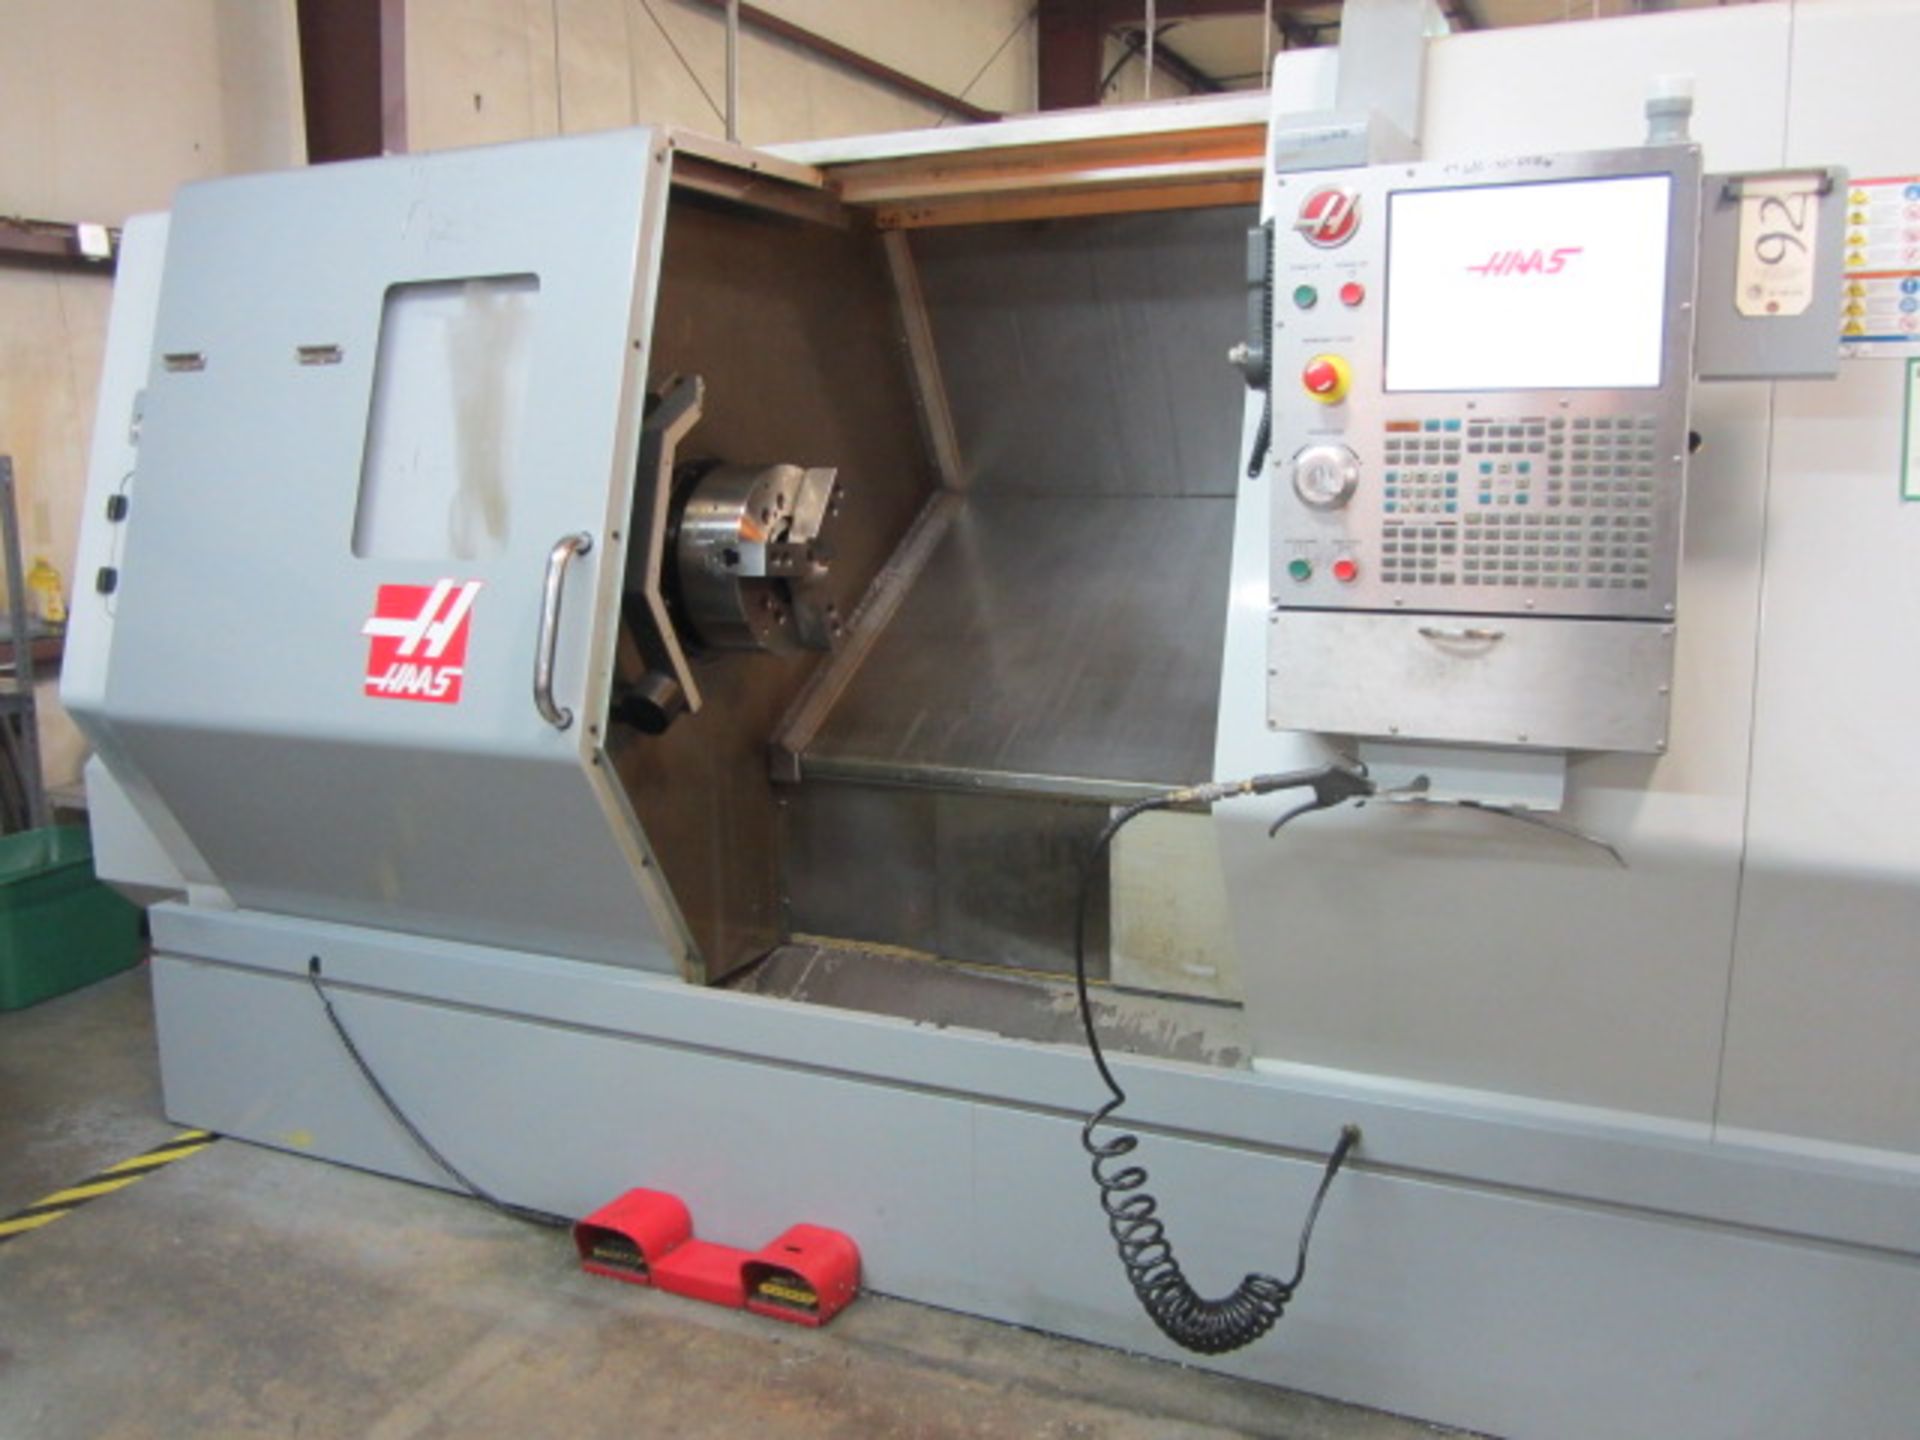 Haas SL40 CNC Turning Center with 15'' 3-Jaw Power Chuck, 4-1/2'' Bore, Approx 70'' Max Distance - Image 2 of 10